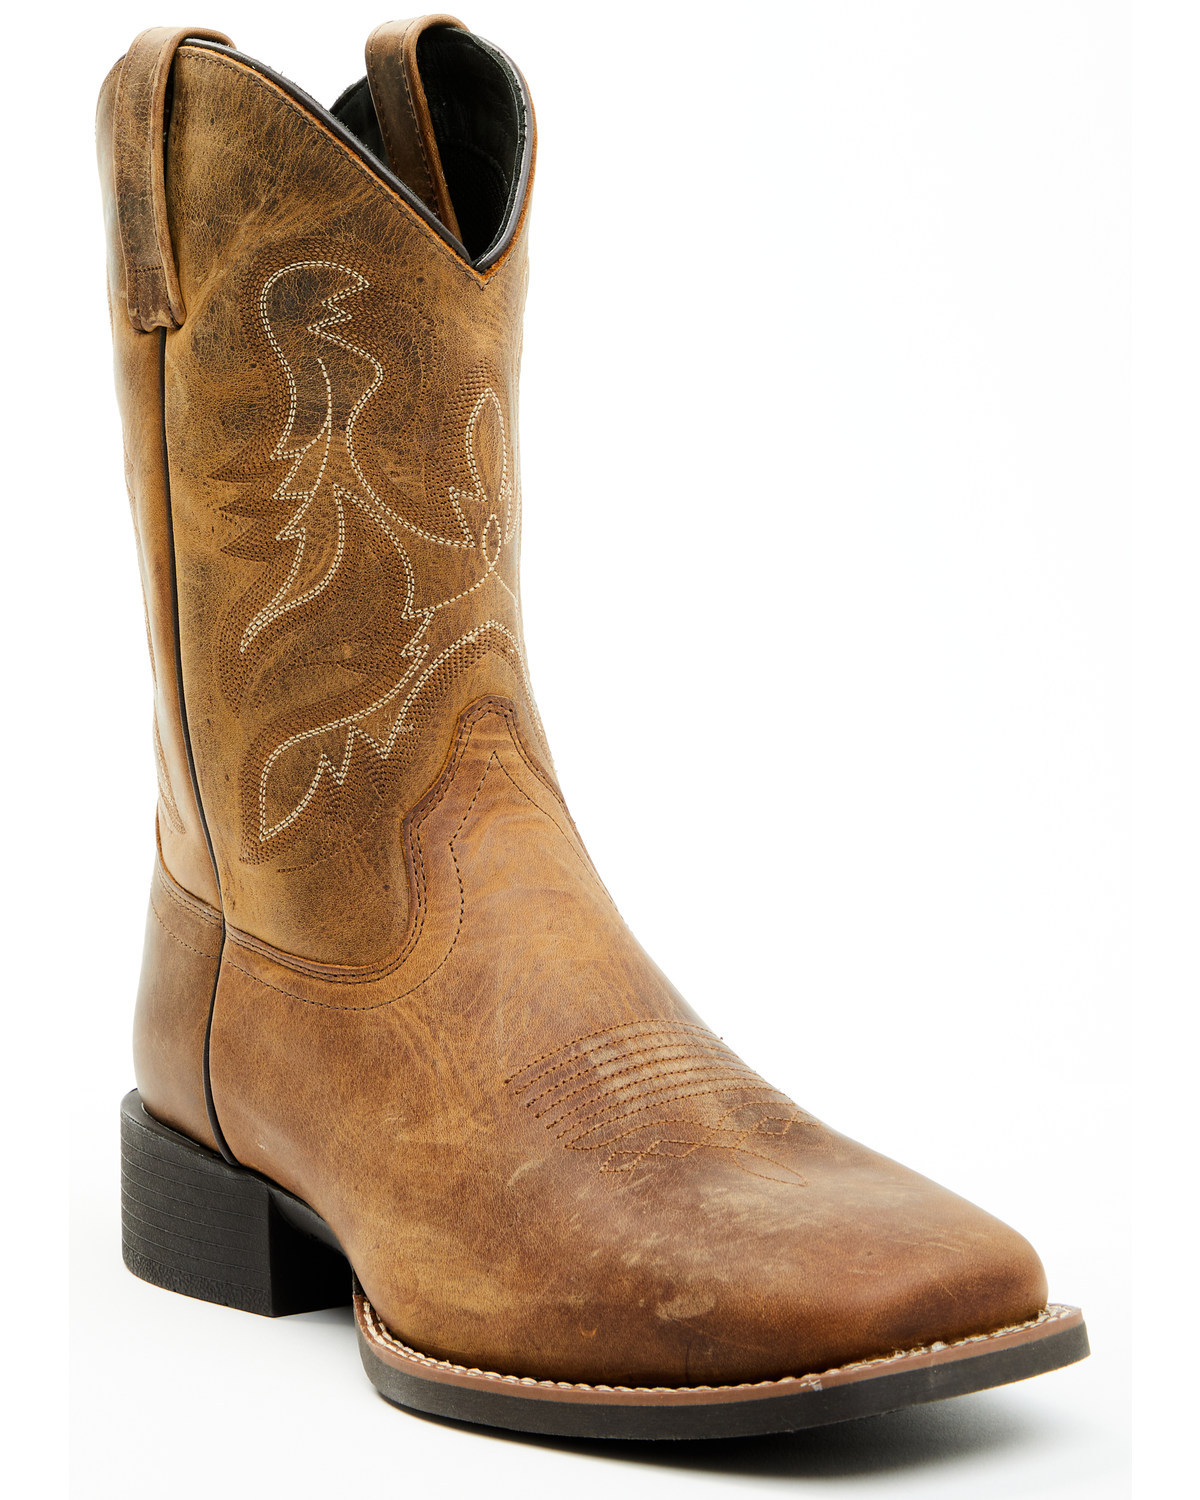 Cody James Men's Ace Western Boots - Broad Square Toe